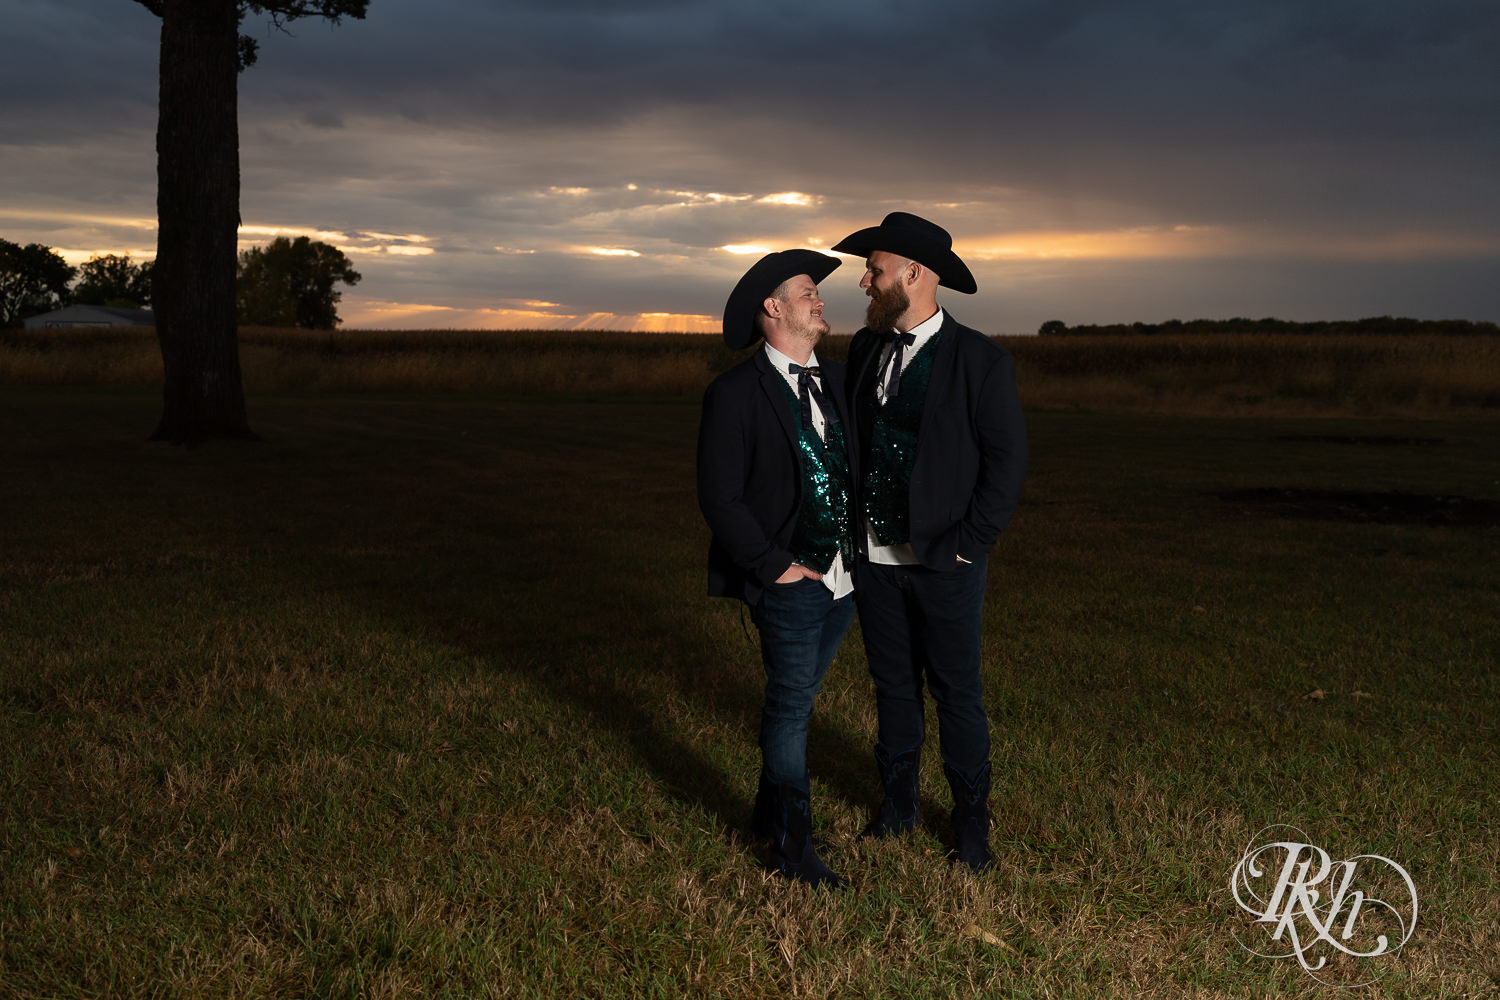 Grooms looking at each other during sunset on their wedding day.